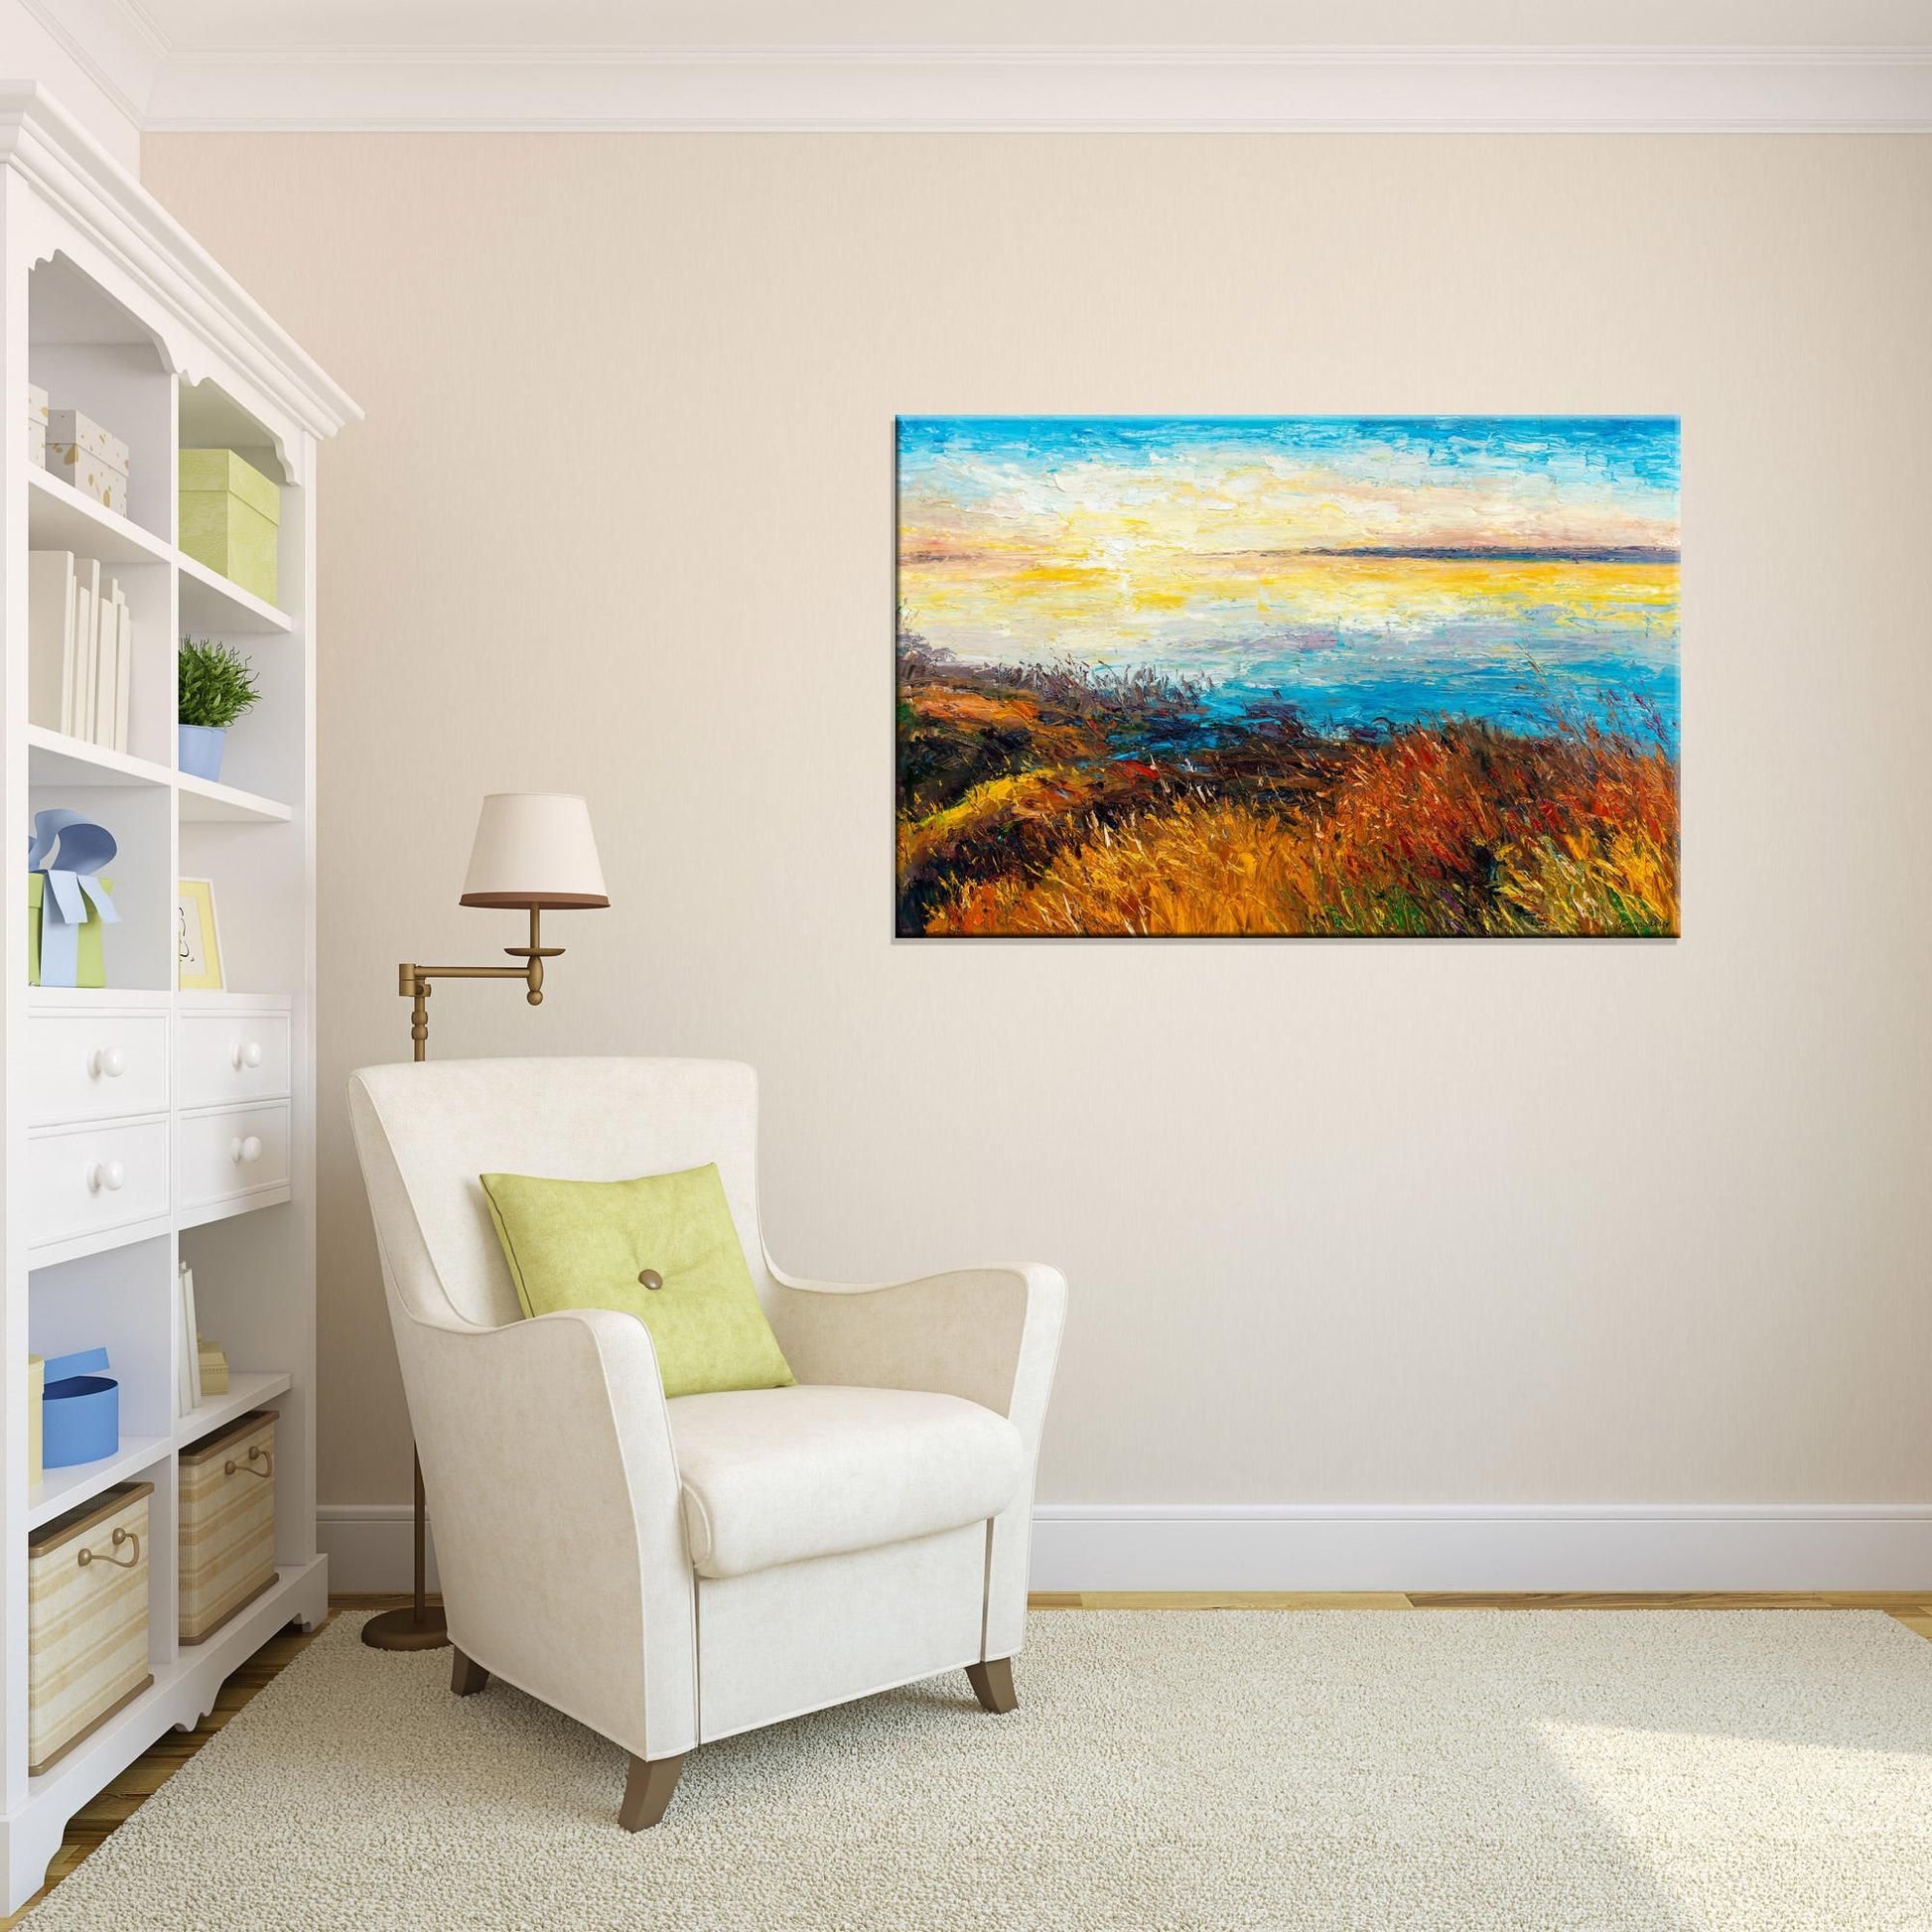 Landscape Painting Sunrise By The River , Canvas Painting, Wall Art Painting, Landscape Painting, Large Painting, Handmade, Contemporary